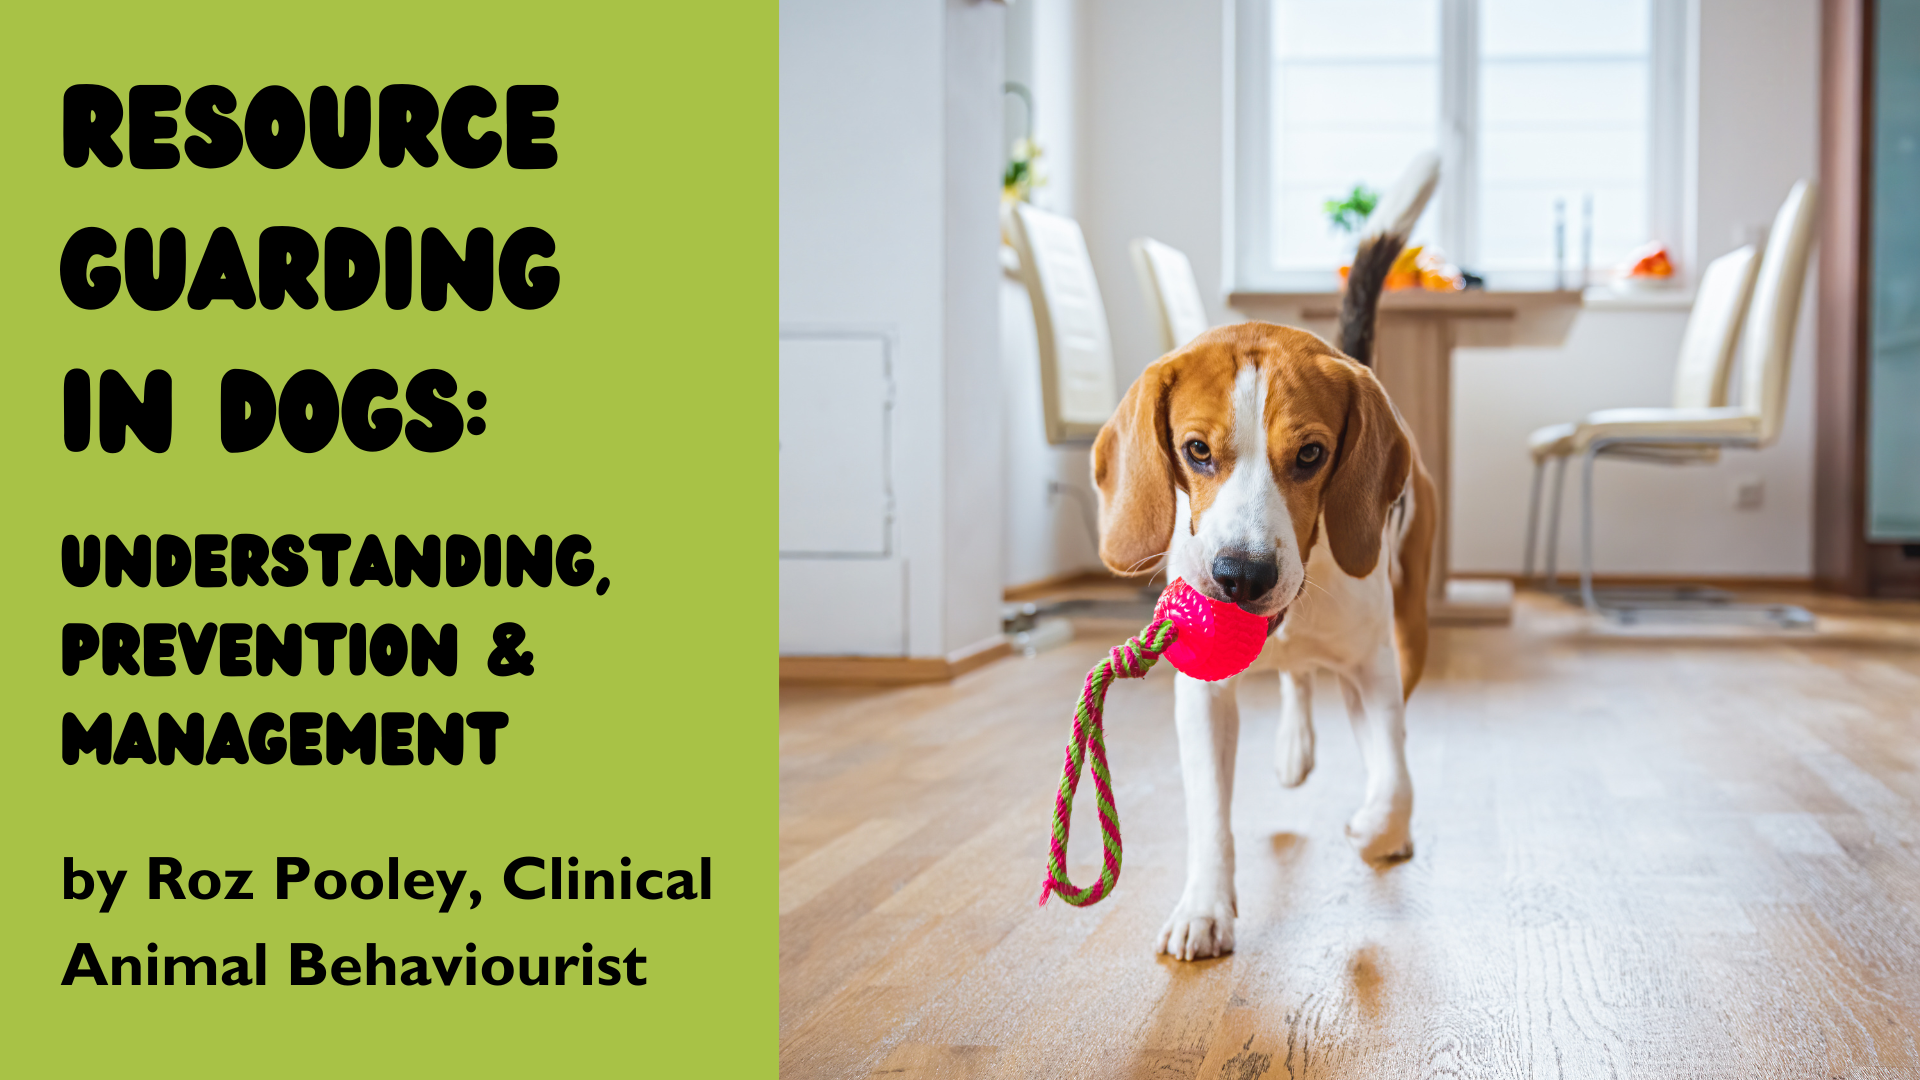 Resource Guarding in Dogs: Understanding, Prevention & Management